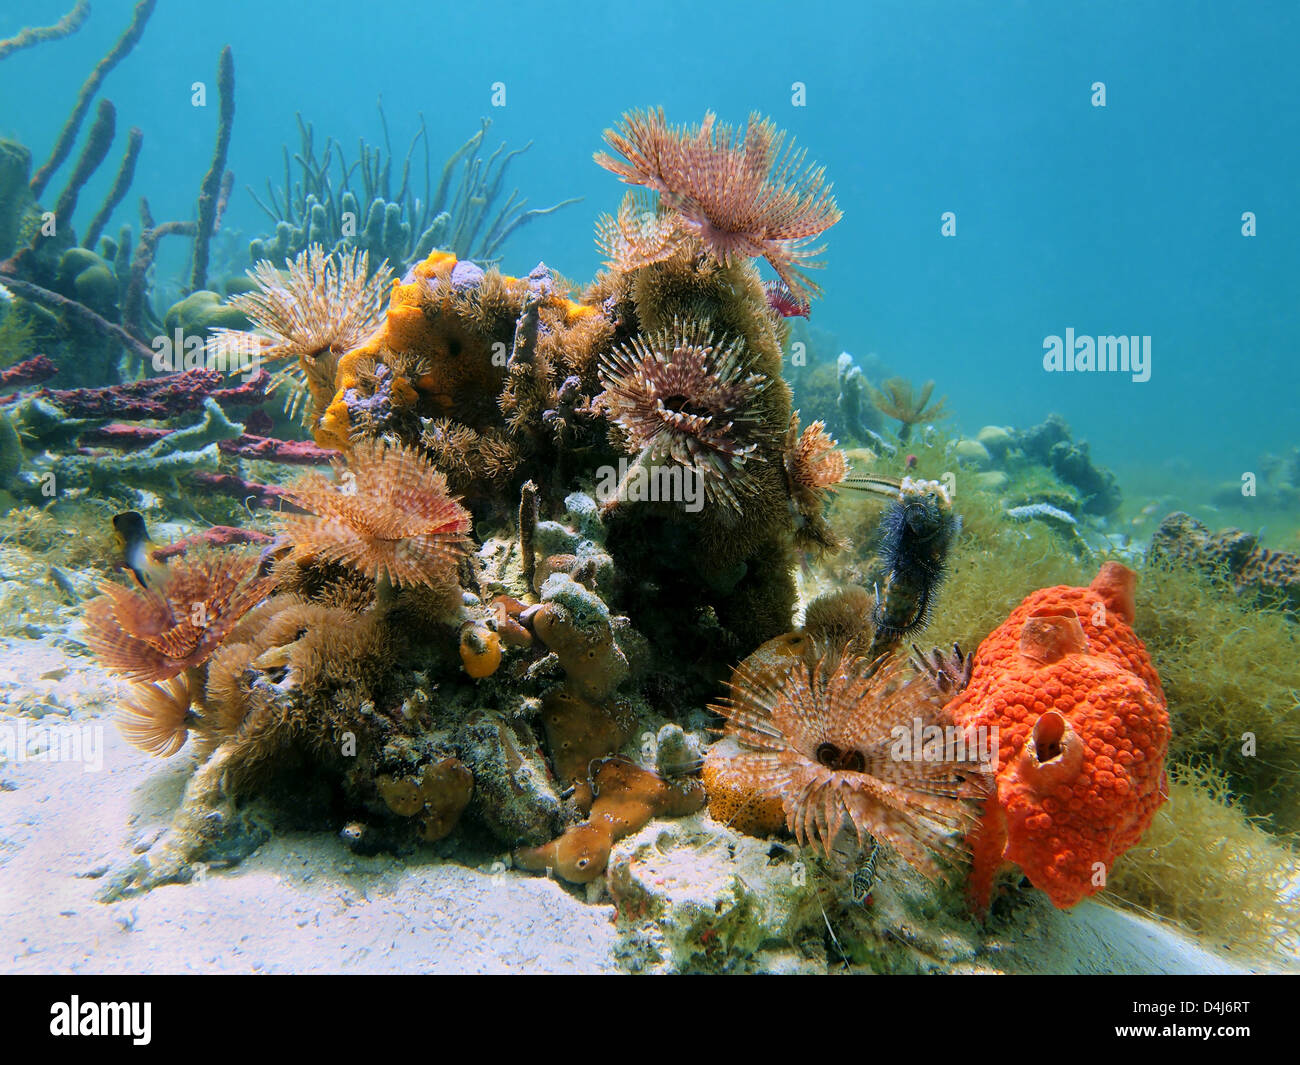 Colorful marine life with feather duster worms and sea sponges in the Caribbean sea Stock Photo